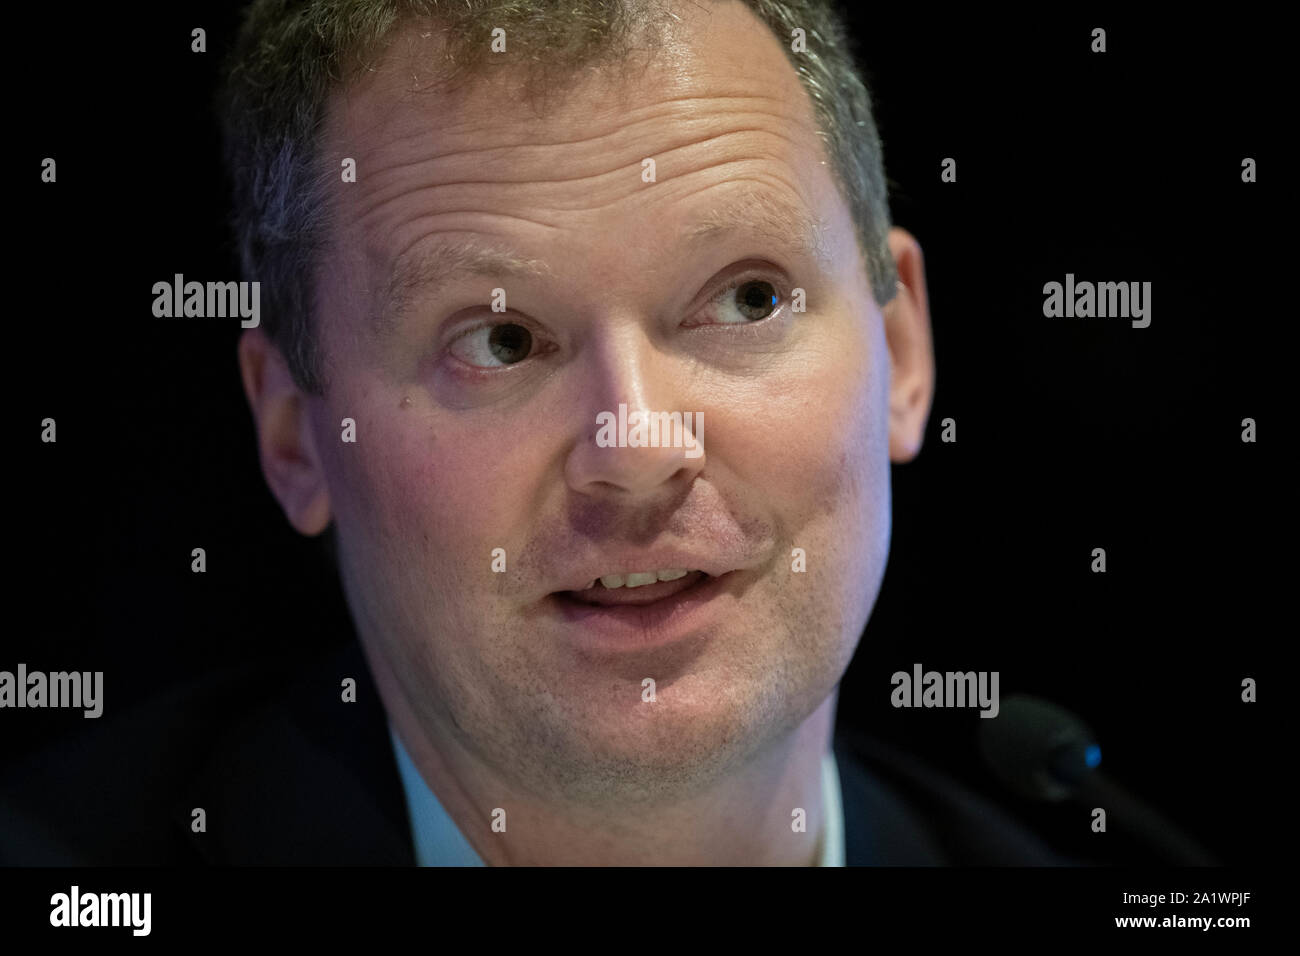 Manchester, UK. 29th September 2019. Neil O'Brien, MP for Harborough, speaks at a Resolution Foundation fringe event 'The Future of Conservatism: How to win back younger voters' on day one of the Conservative Party Conference in Manchester. © Russell Hart/Alamy Live News. Stock Photo